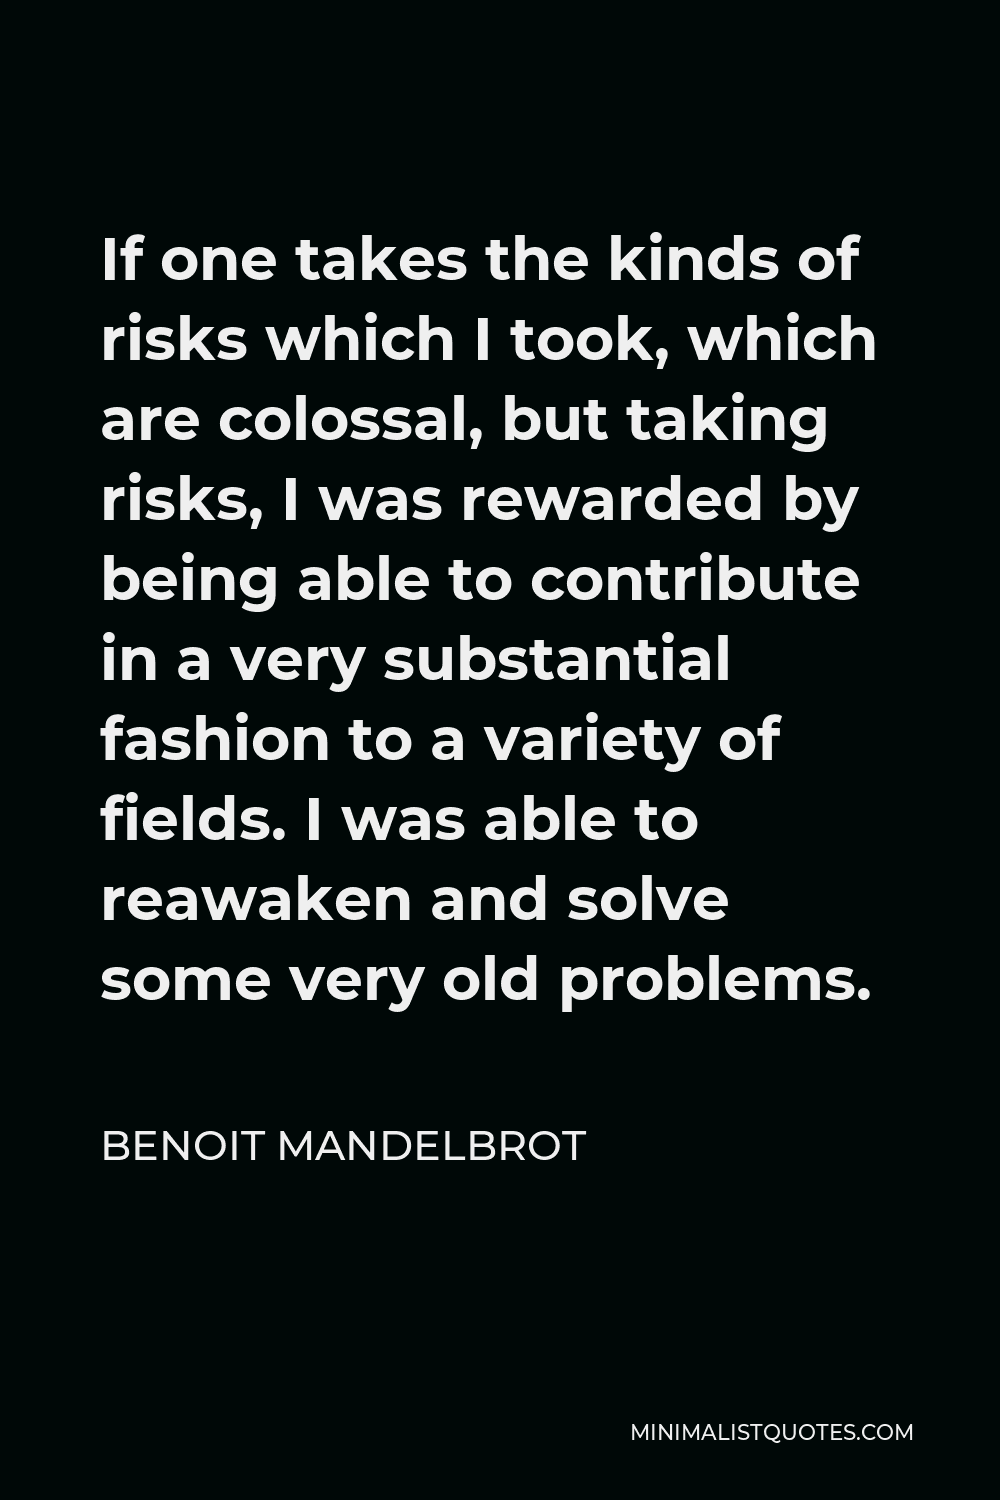 Benoit Mandelbrot Quote - If one takes the kinds of risks which I took, which are colossal, but taking risks, I was rewarded by being able to contribute in a very substantial fashion to a variety of fields. I was able to reawaken and solve some very old problems.